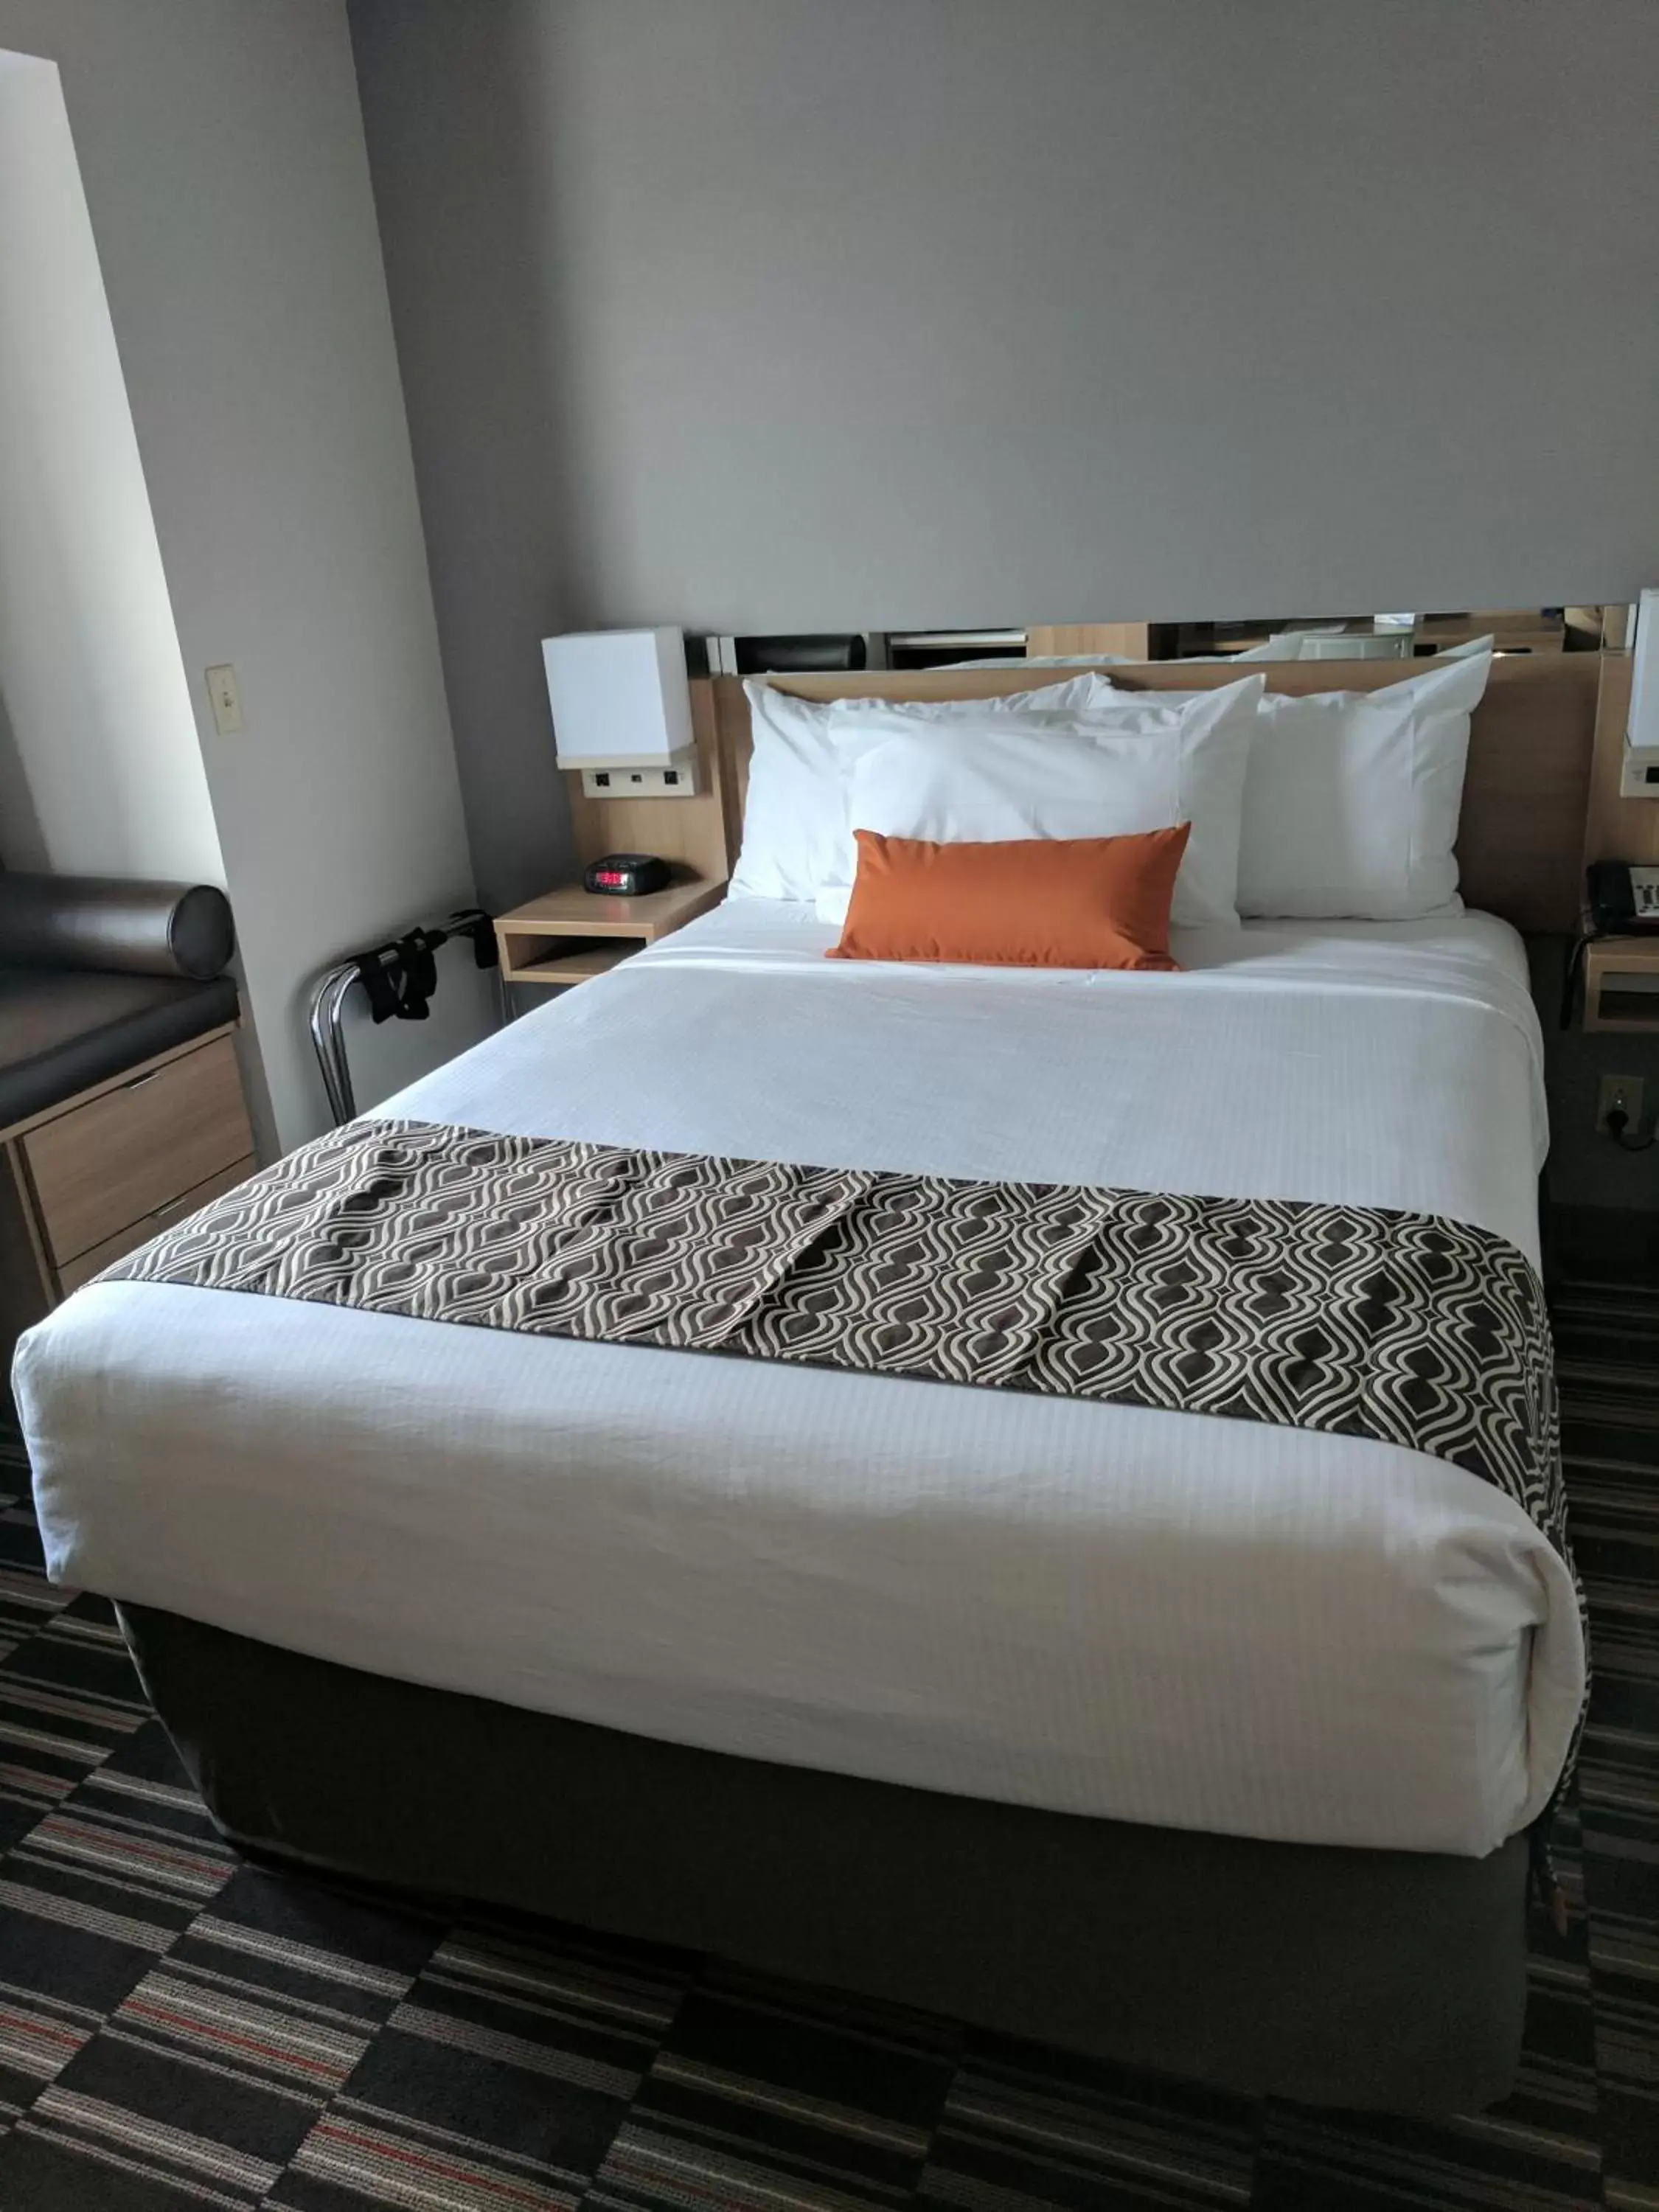 Bed in Microtel Inn & Suites by Wyndham Clarion